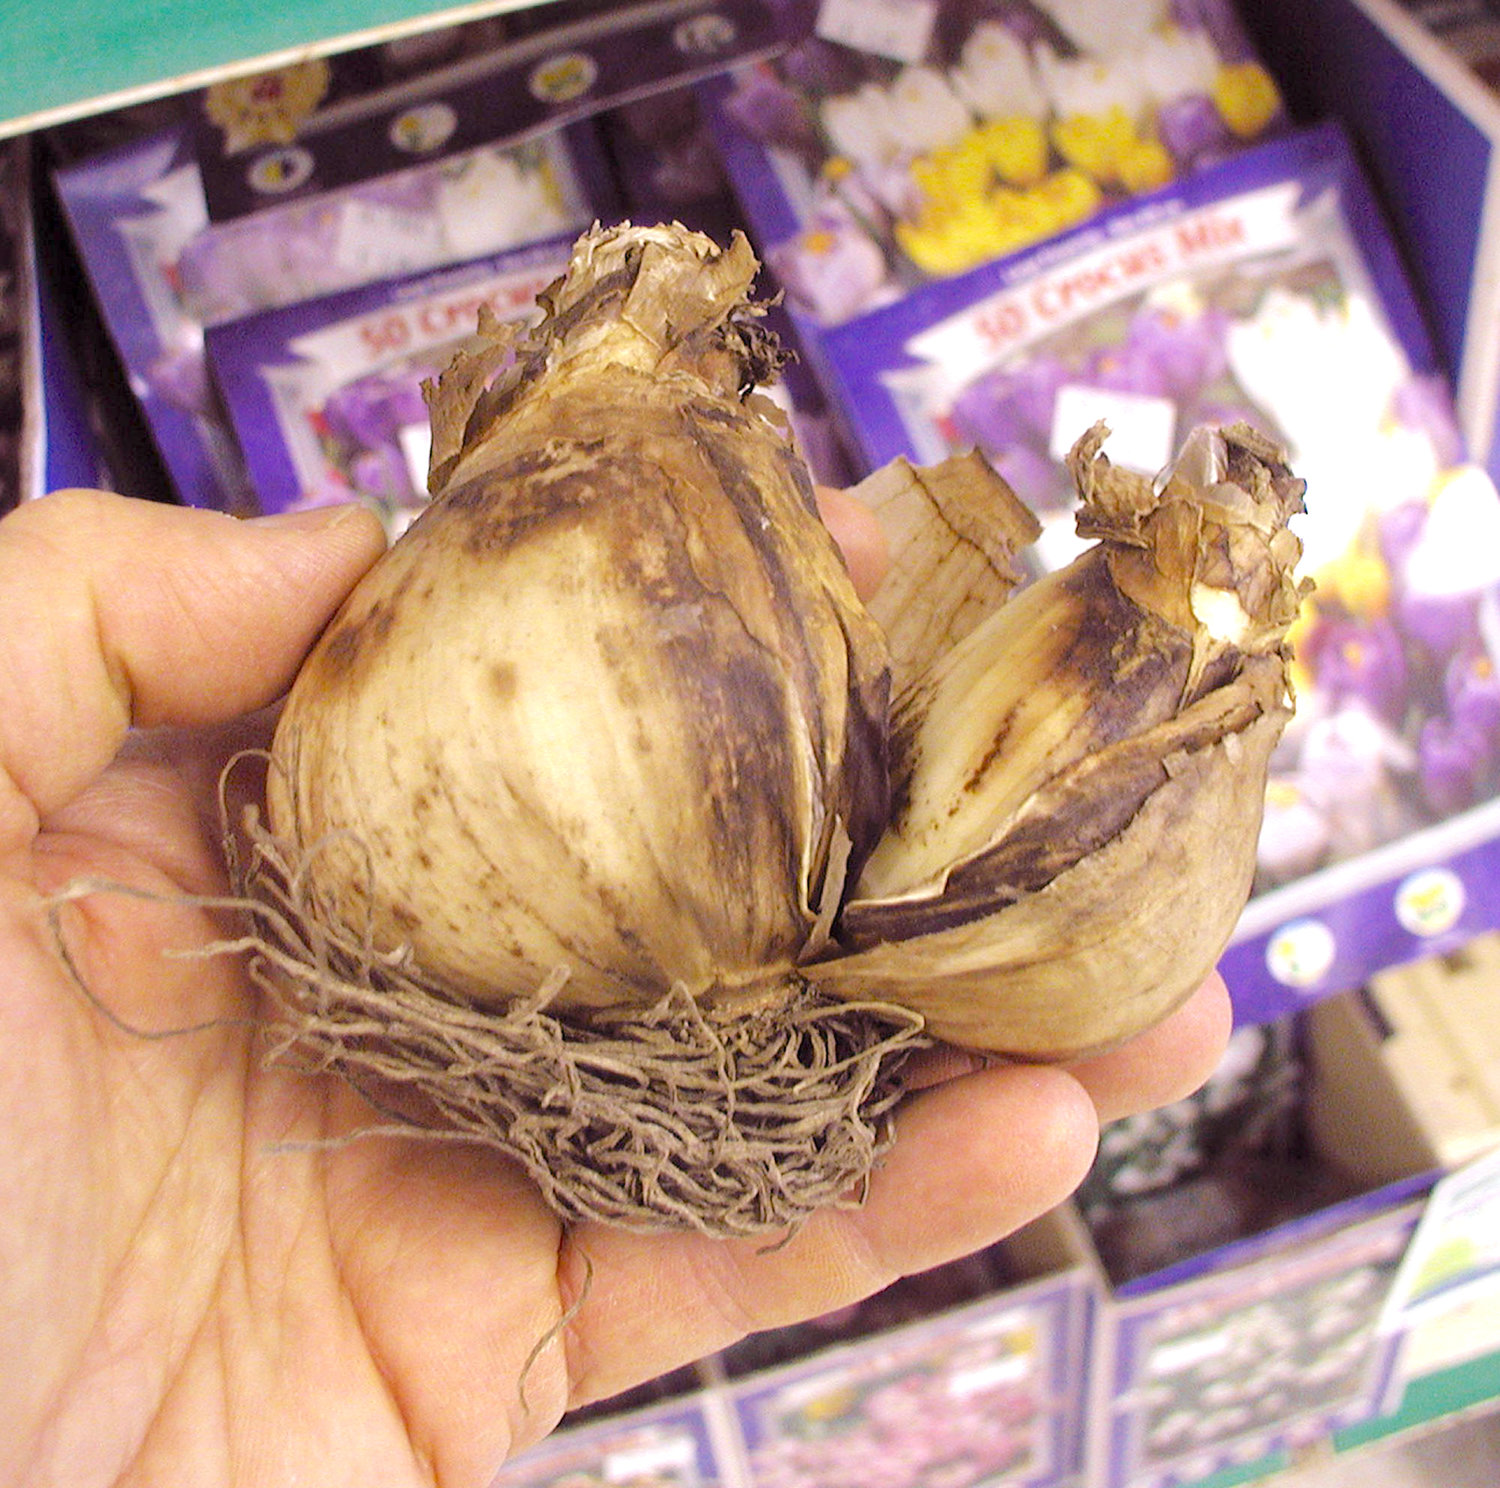 A top size double-nosed daffodil bulb is seen in this undated photo. Forcing bulbs at home is a fun way to enjoy flowers indoors during the winter months.